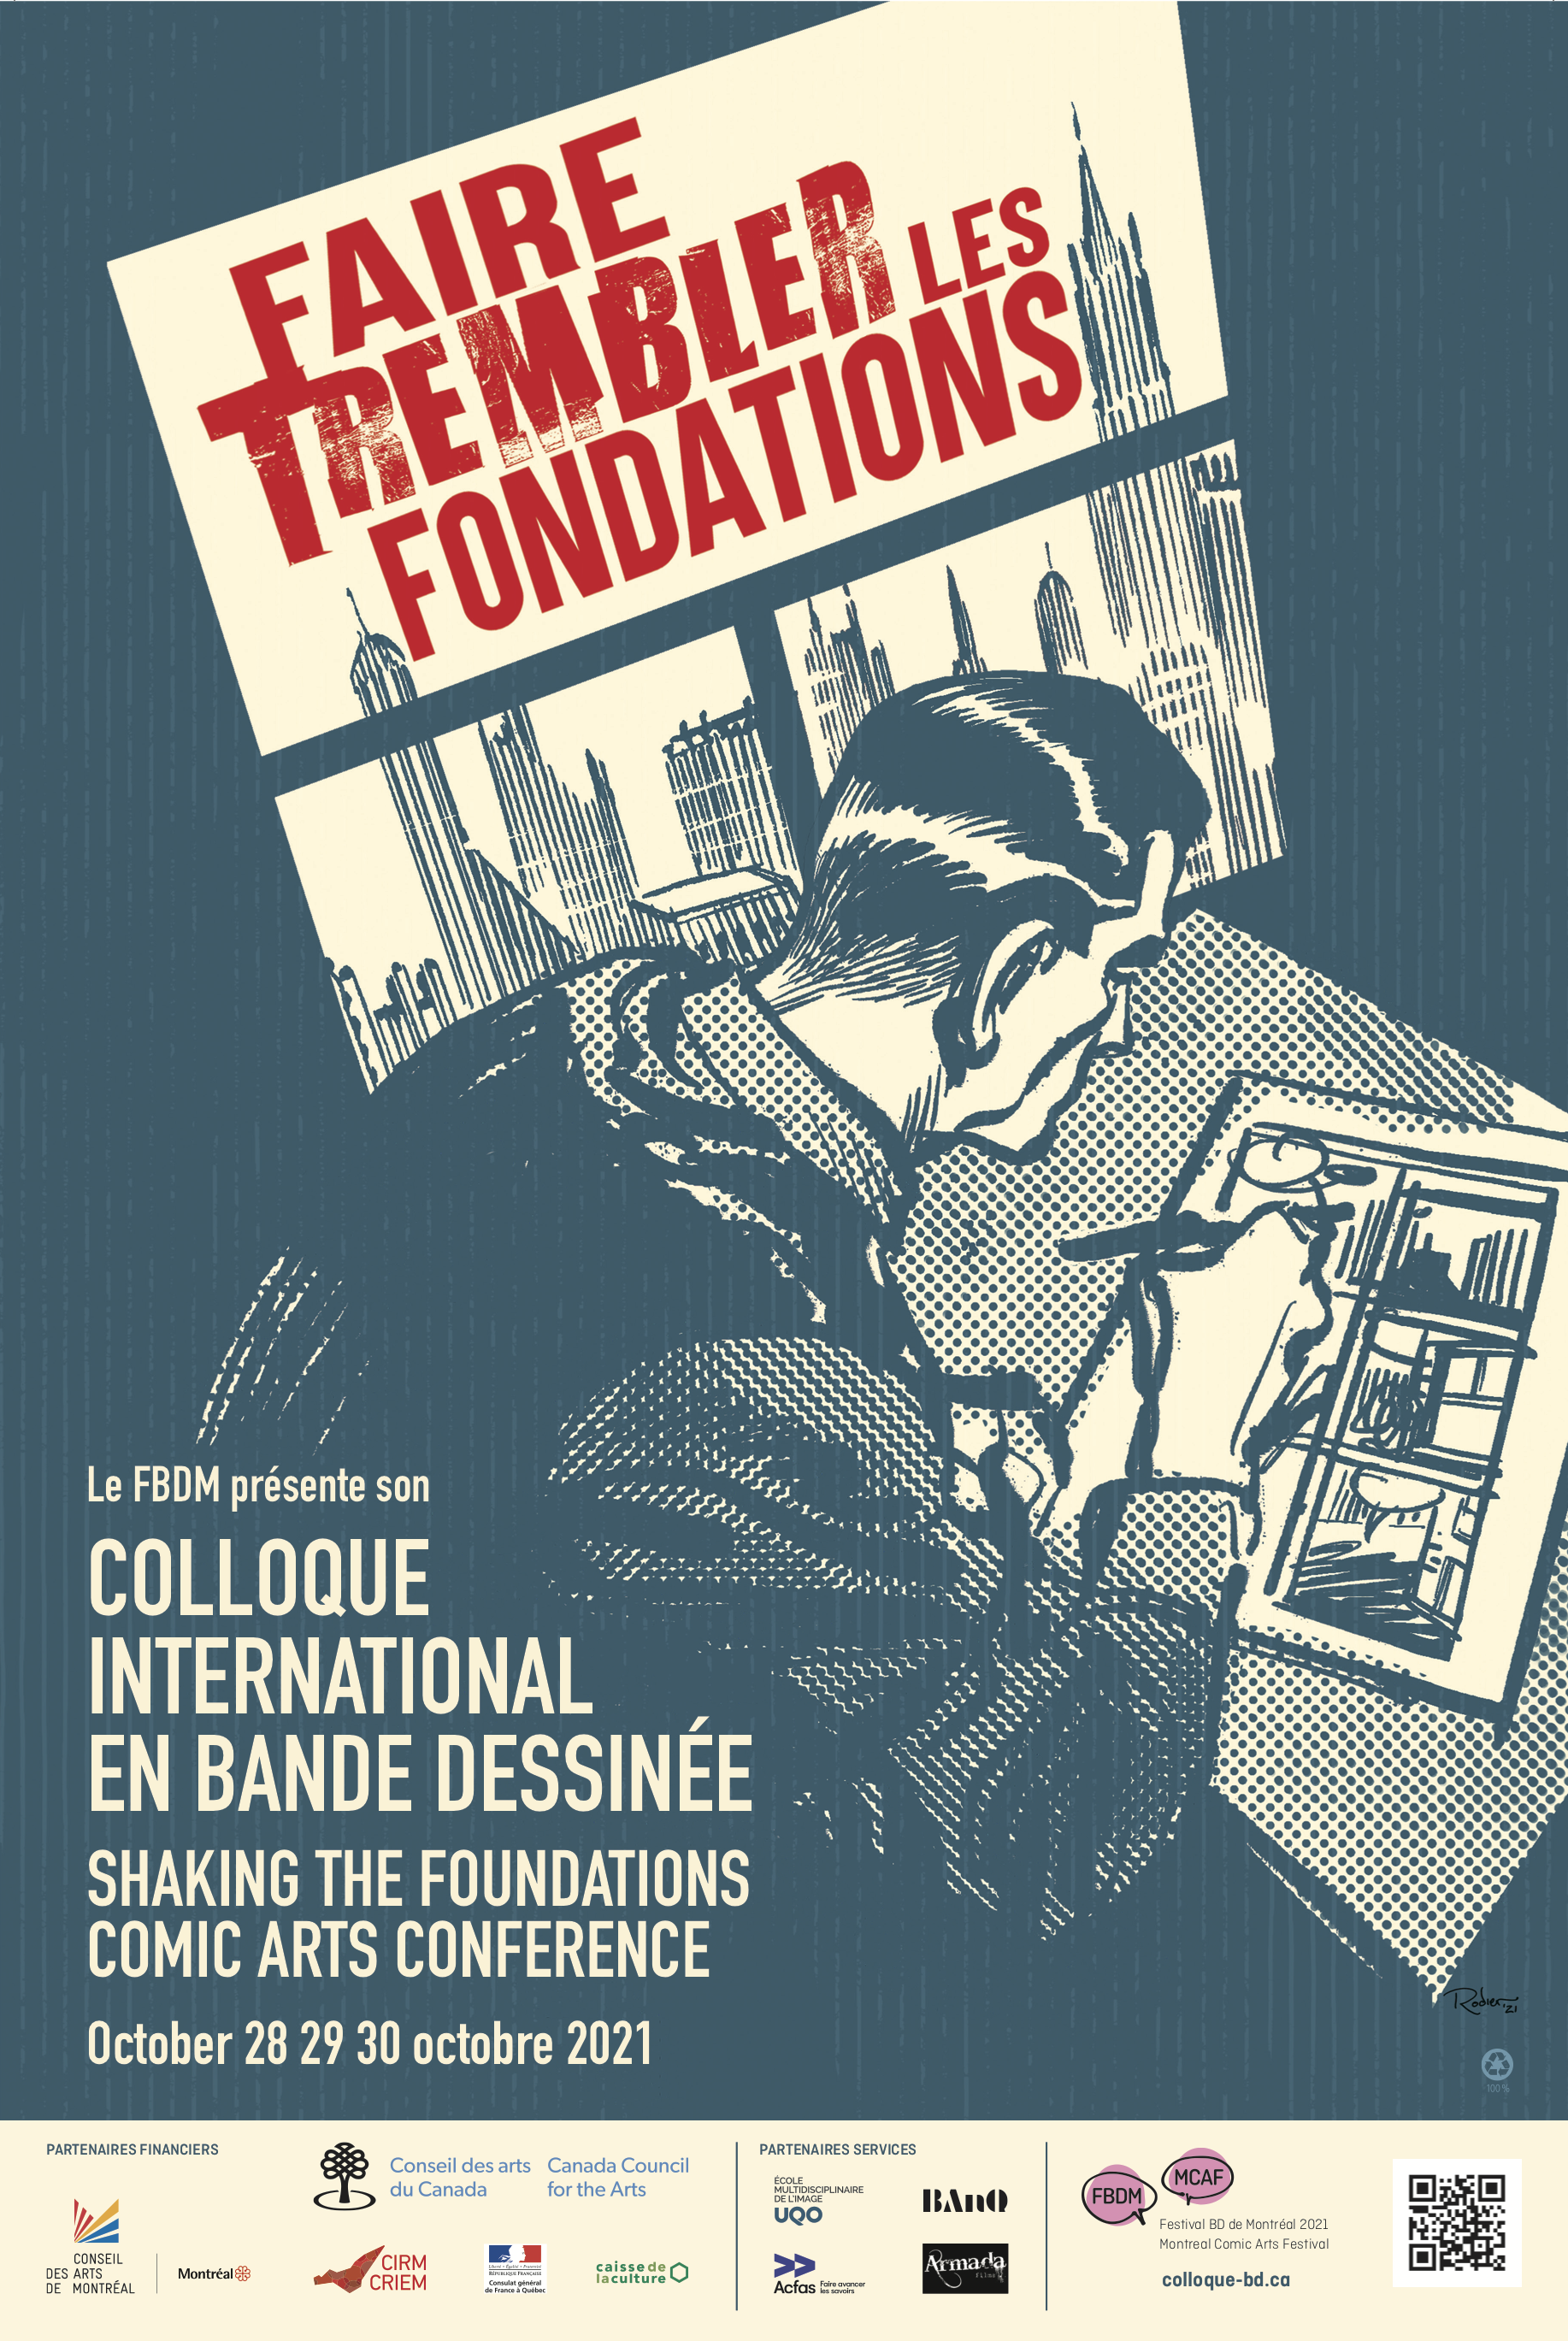 Poster for the Shaking the Foundations Conference